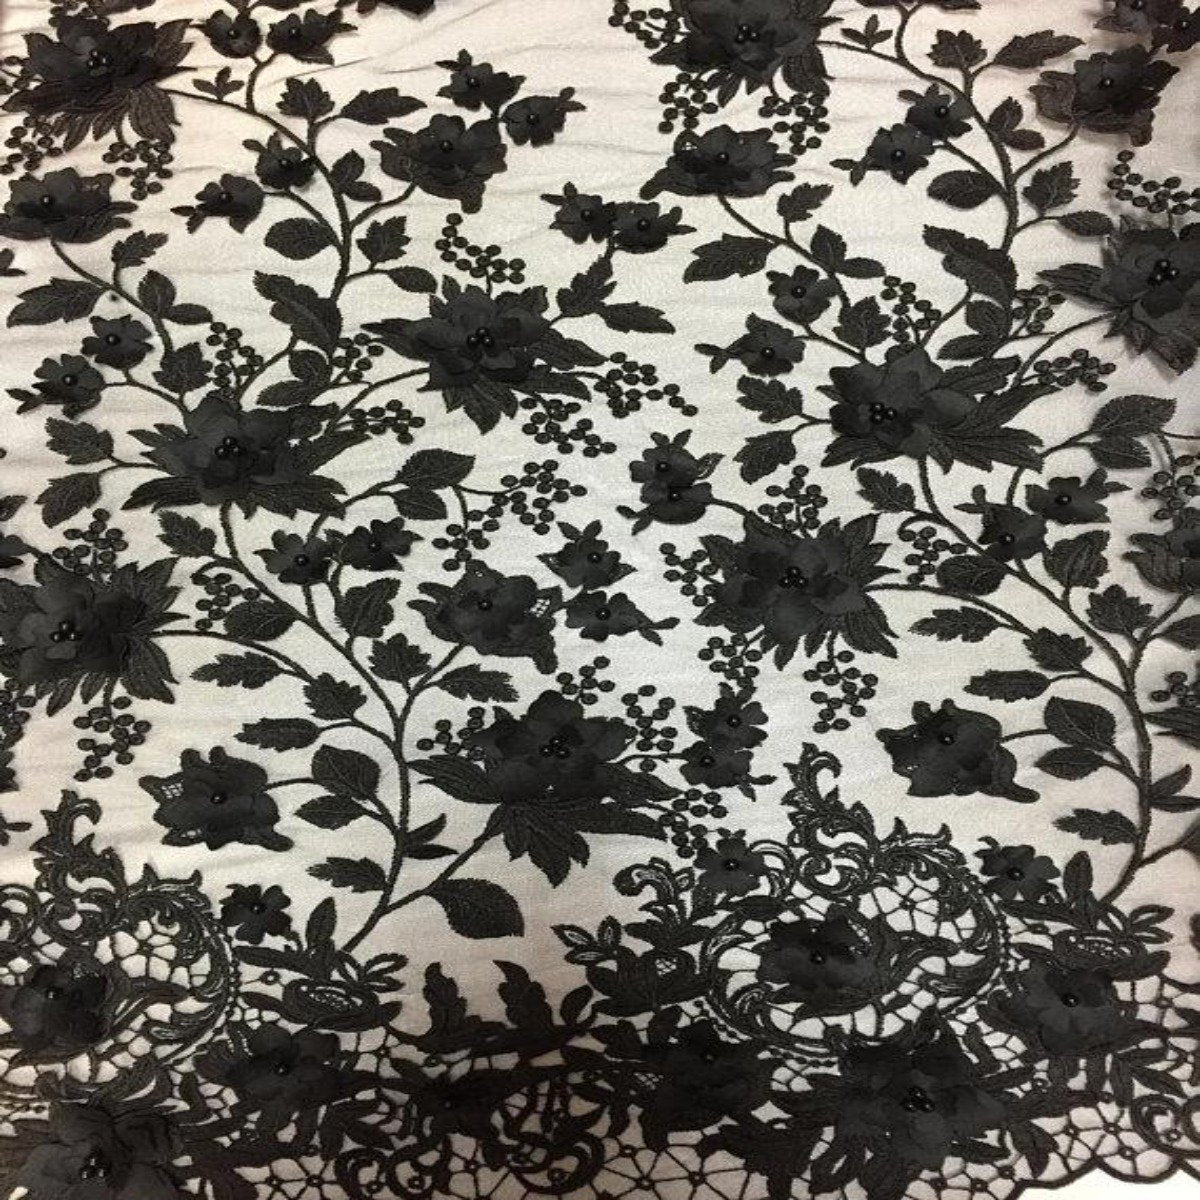 Floral Pattern Embroidered Lace Fabric by the Yard - OneYard